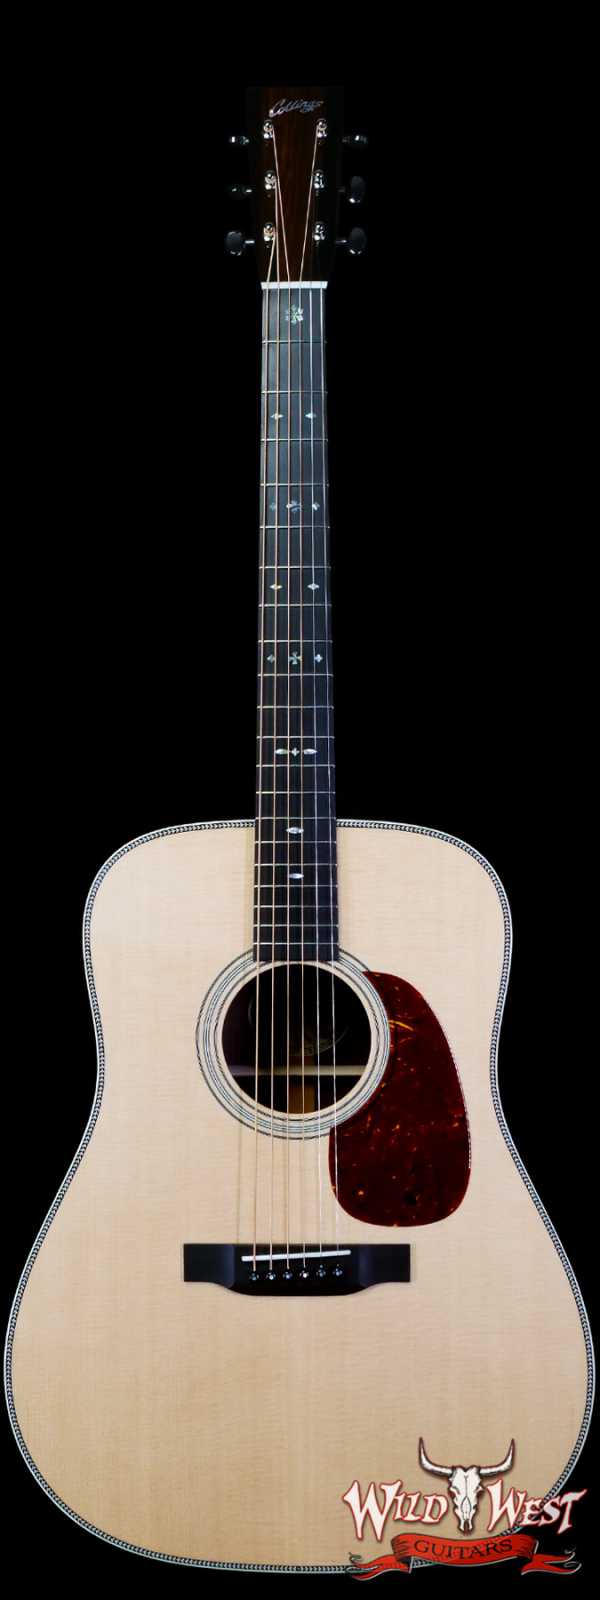 Collings D Serise Dreadnought D2H Sitka Spruce Top East Indian Rosewood Back & Sides 45 Style Snowflake Inlays Natural